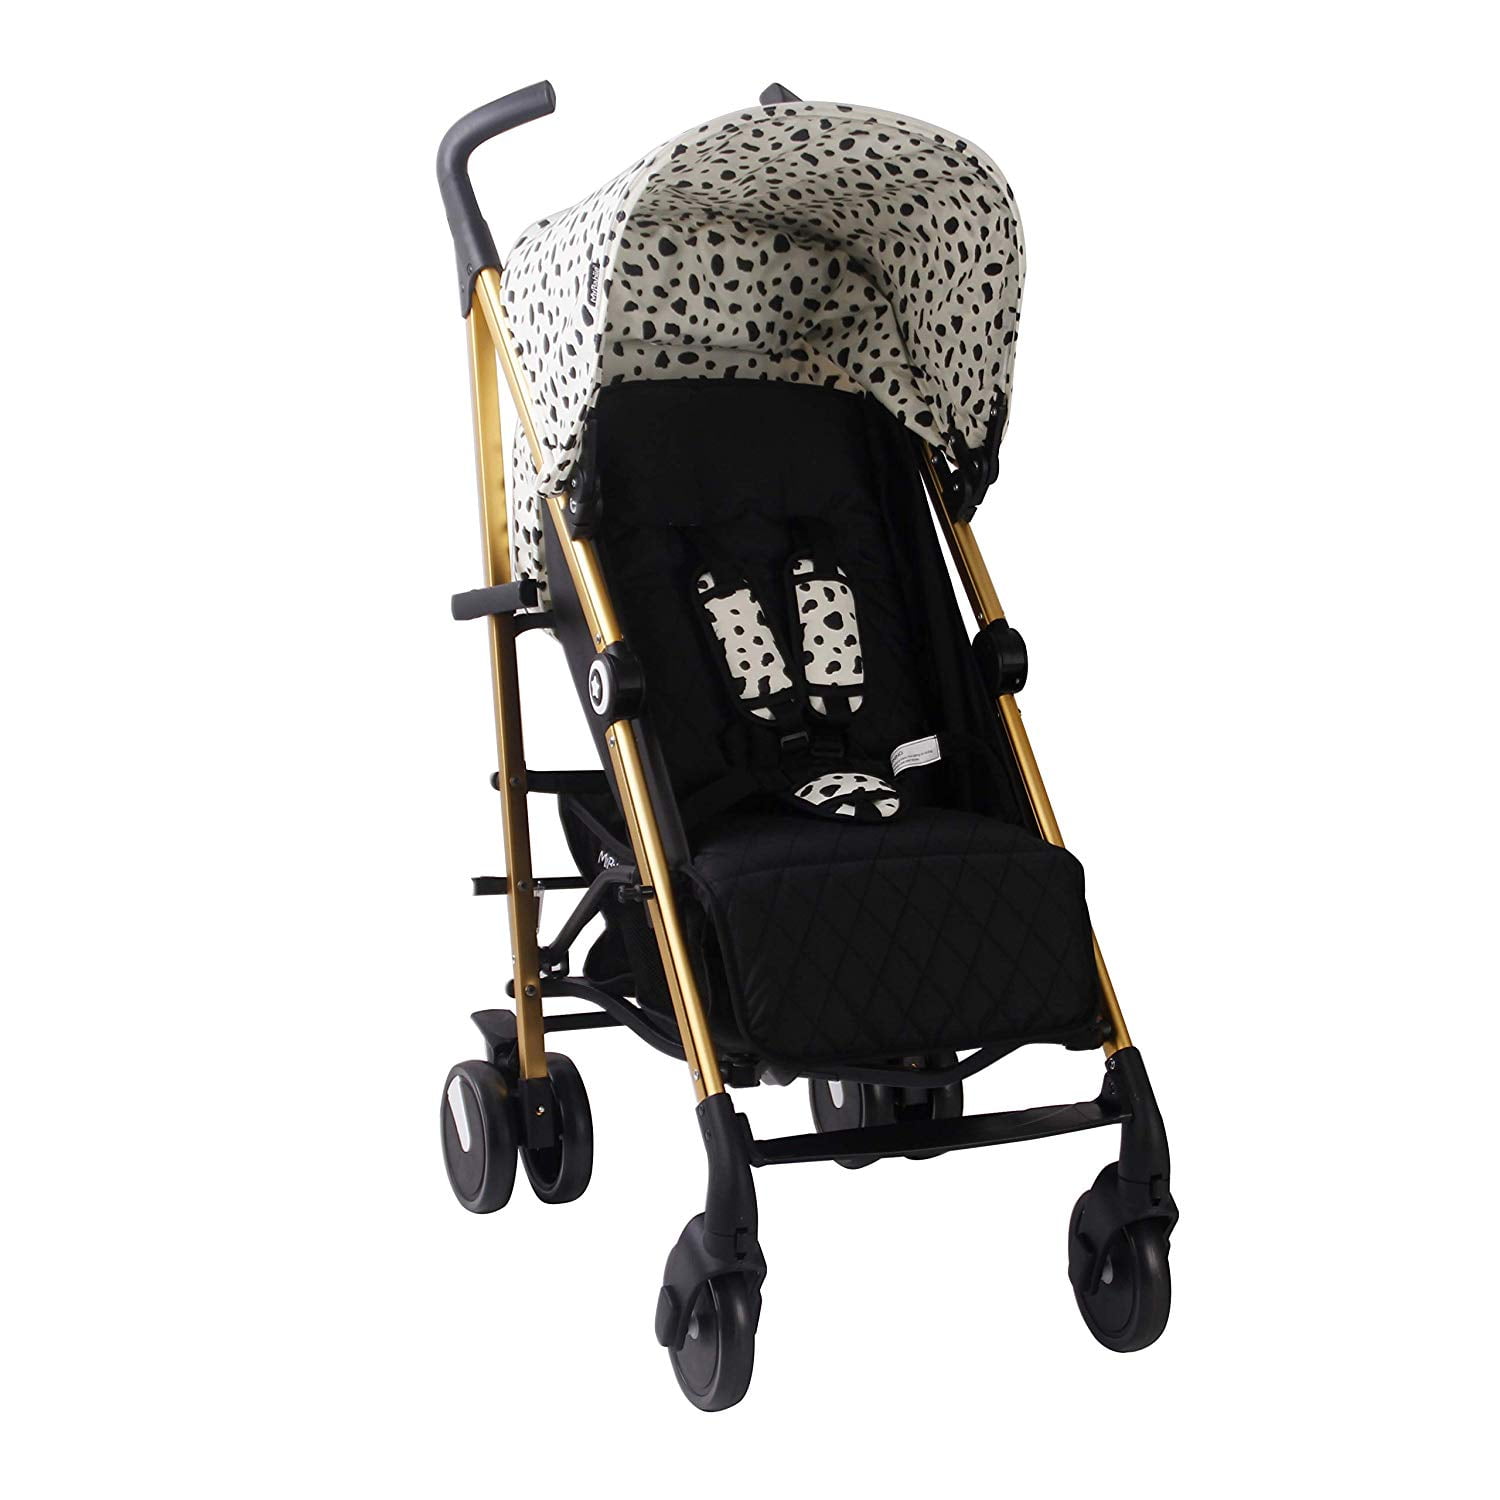 my babiie abbey clancy catwalk collection mb51 gold dalmatian stroller